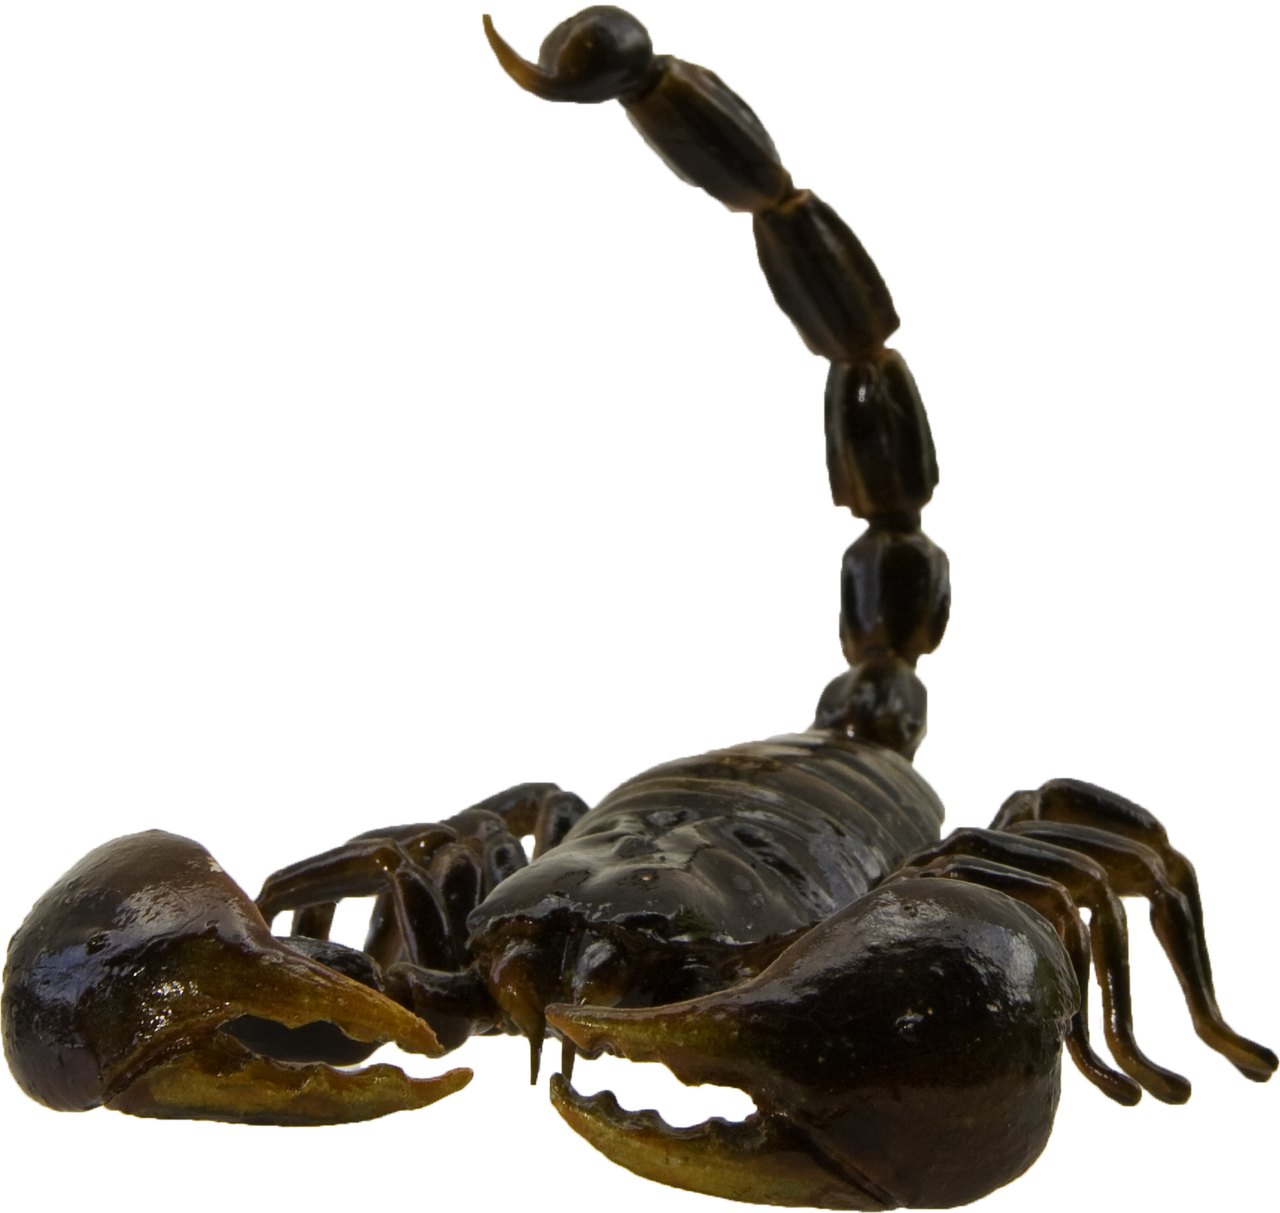 Elevated Scorpion Tail